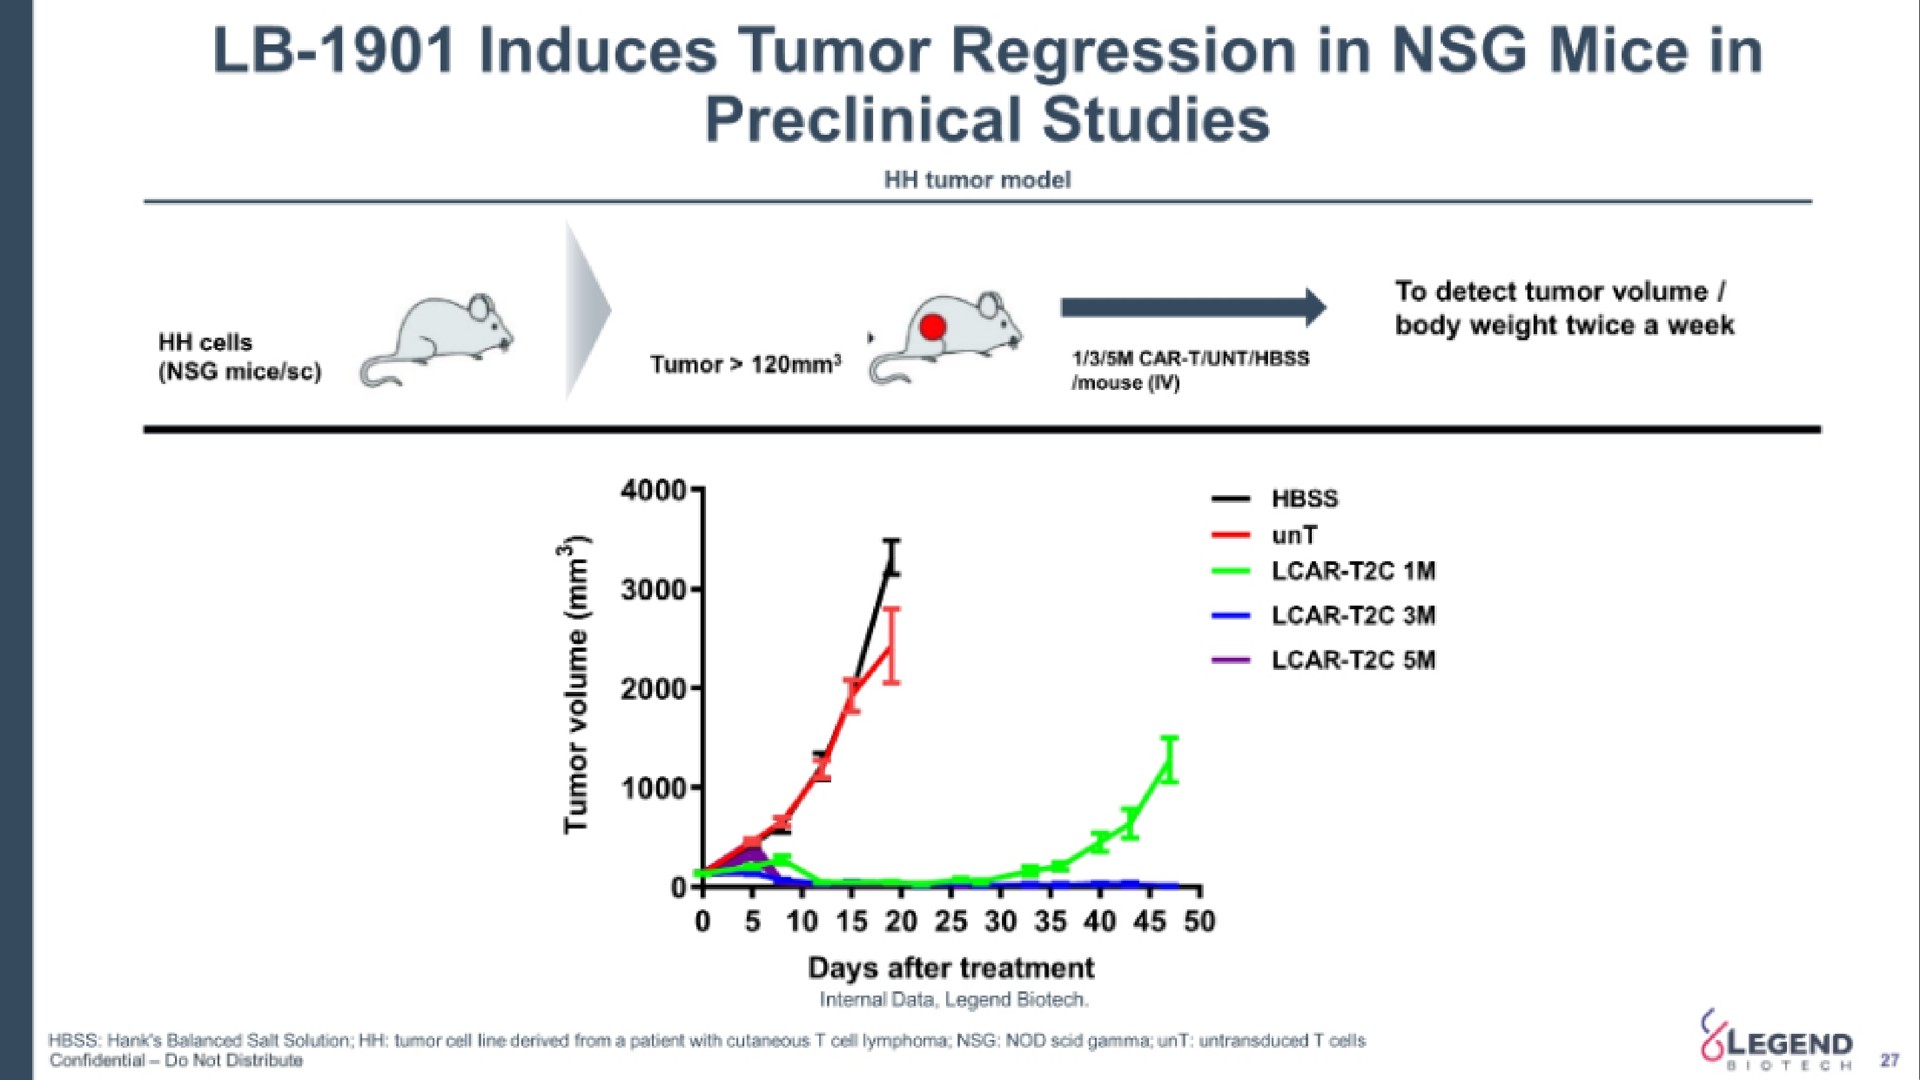 induces tumor regression in mice in preclinical studies | Legend Biotech